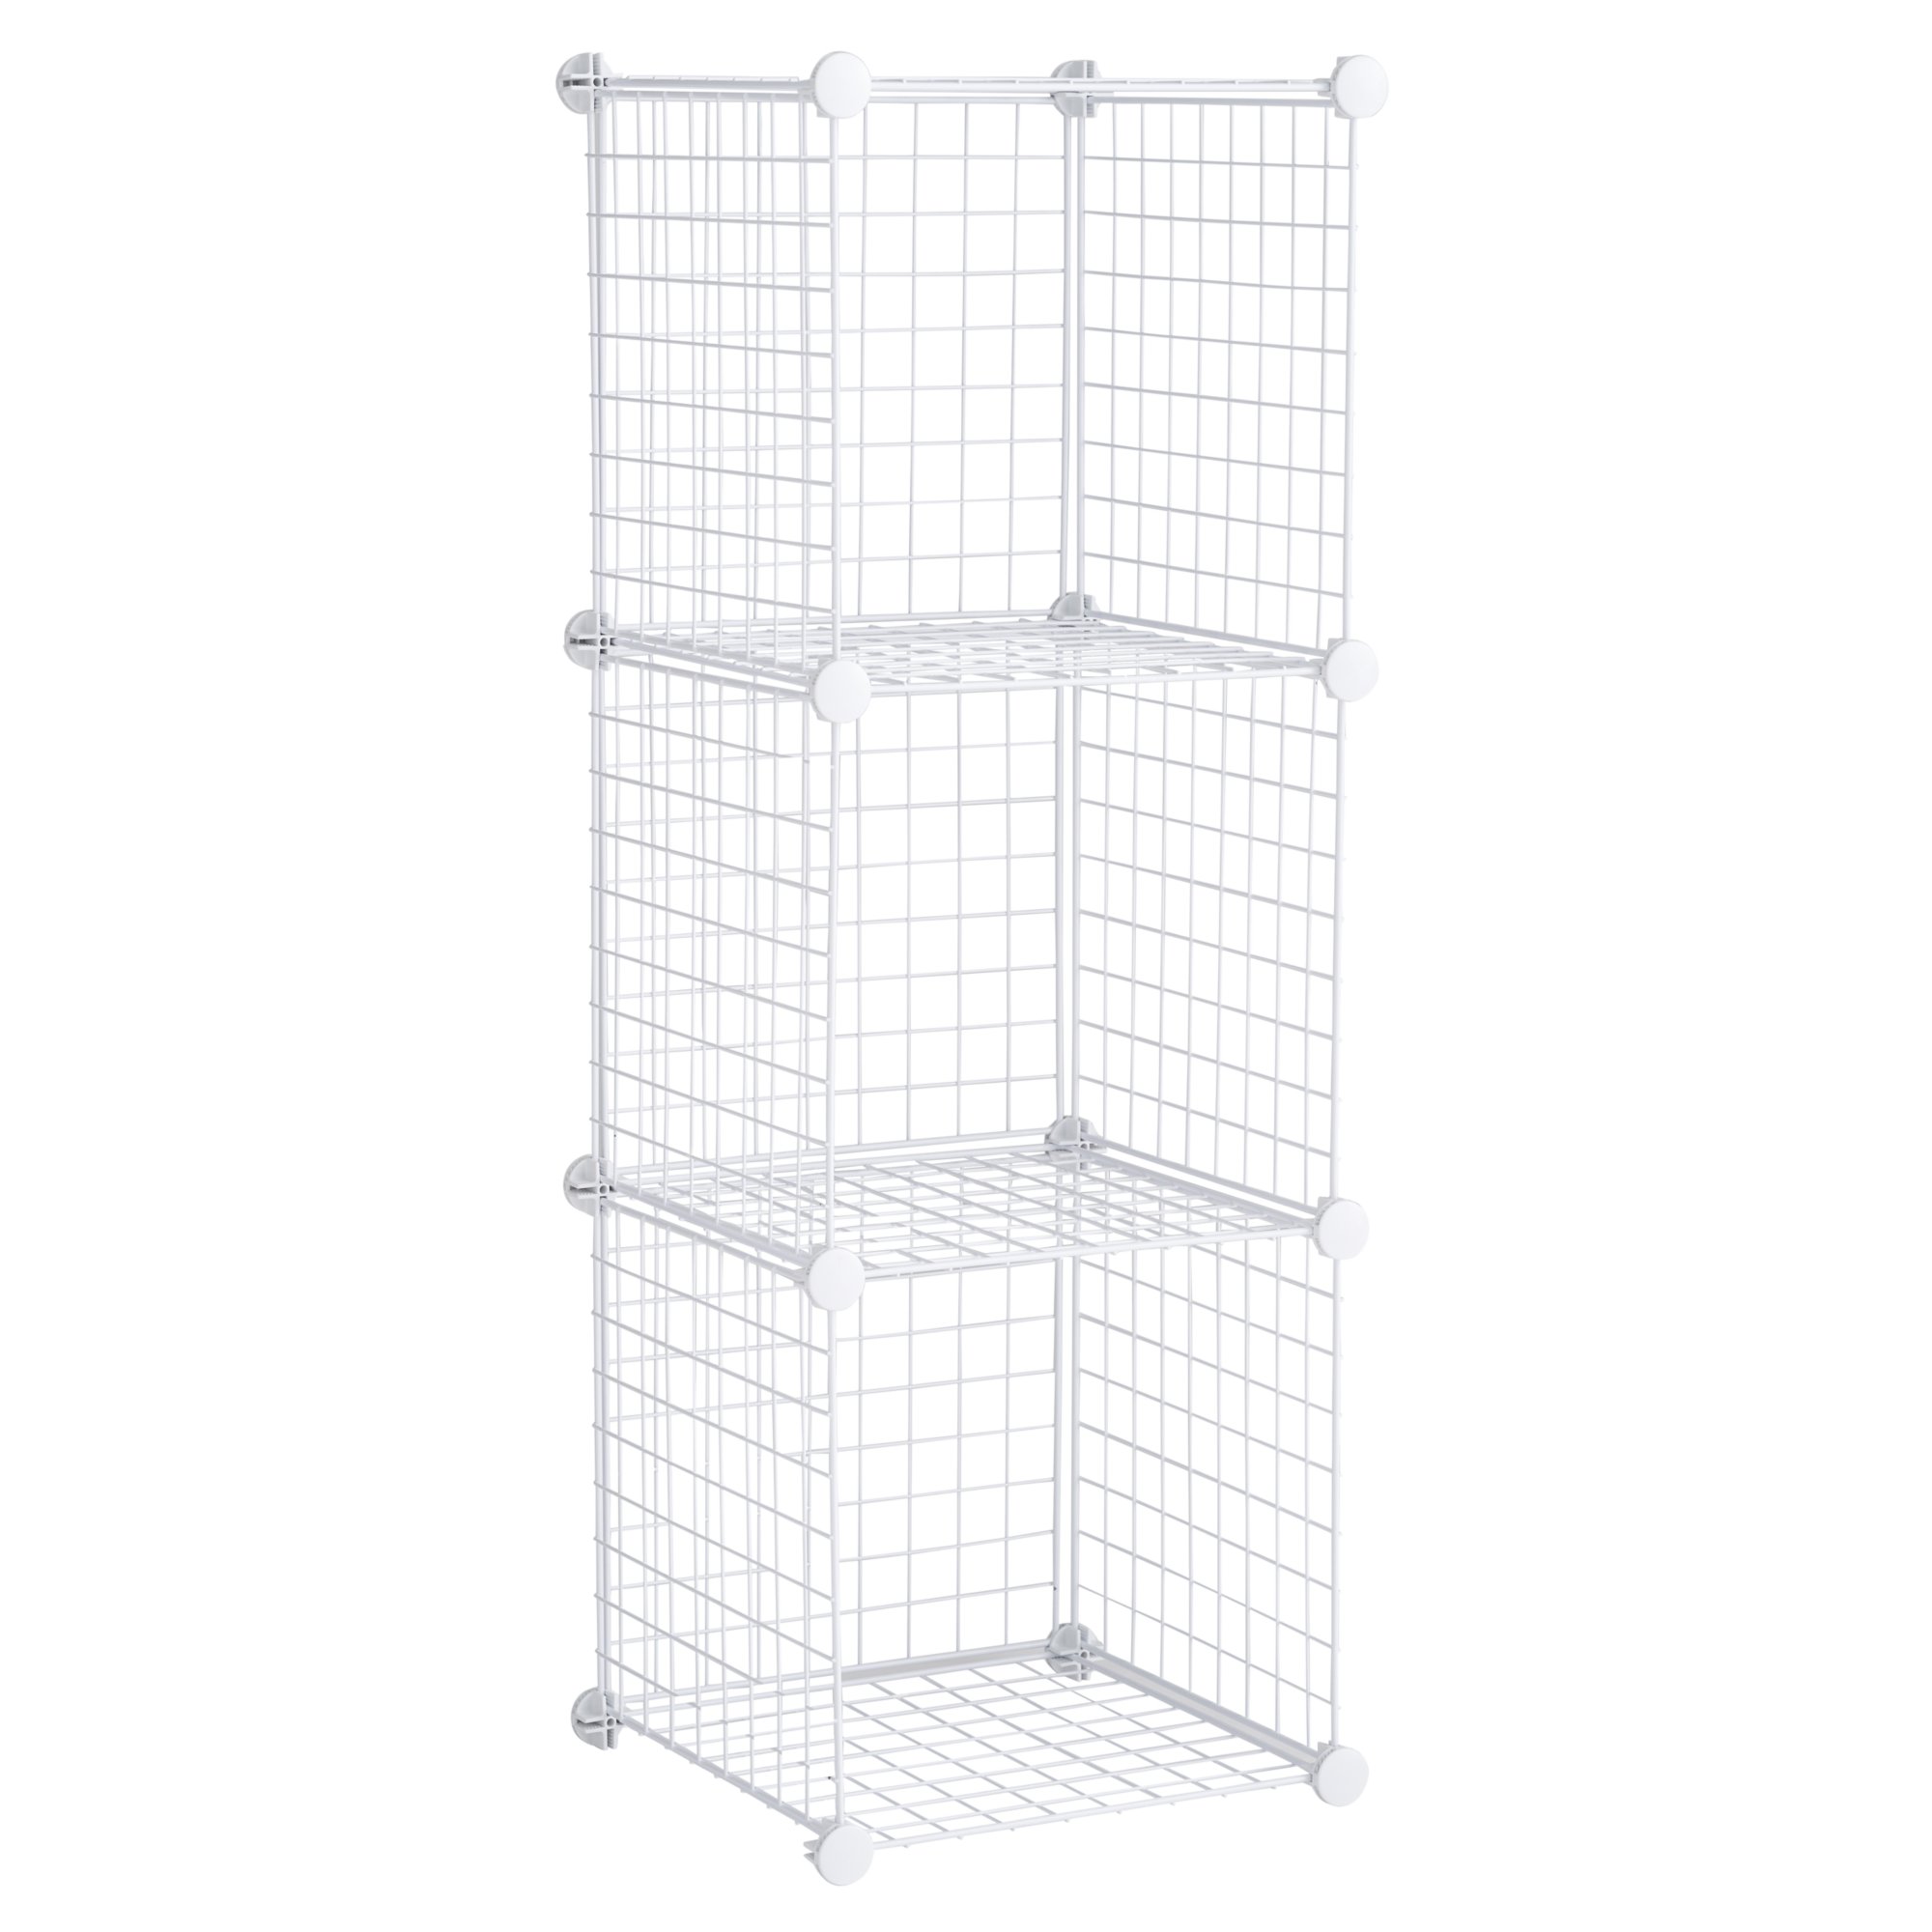 Rubbermaid 3-Piece Stackable Modular Storage Cube Set, White Great for  organizing you bedrooms, dorm rooms closets and more